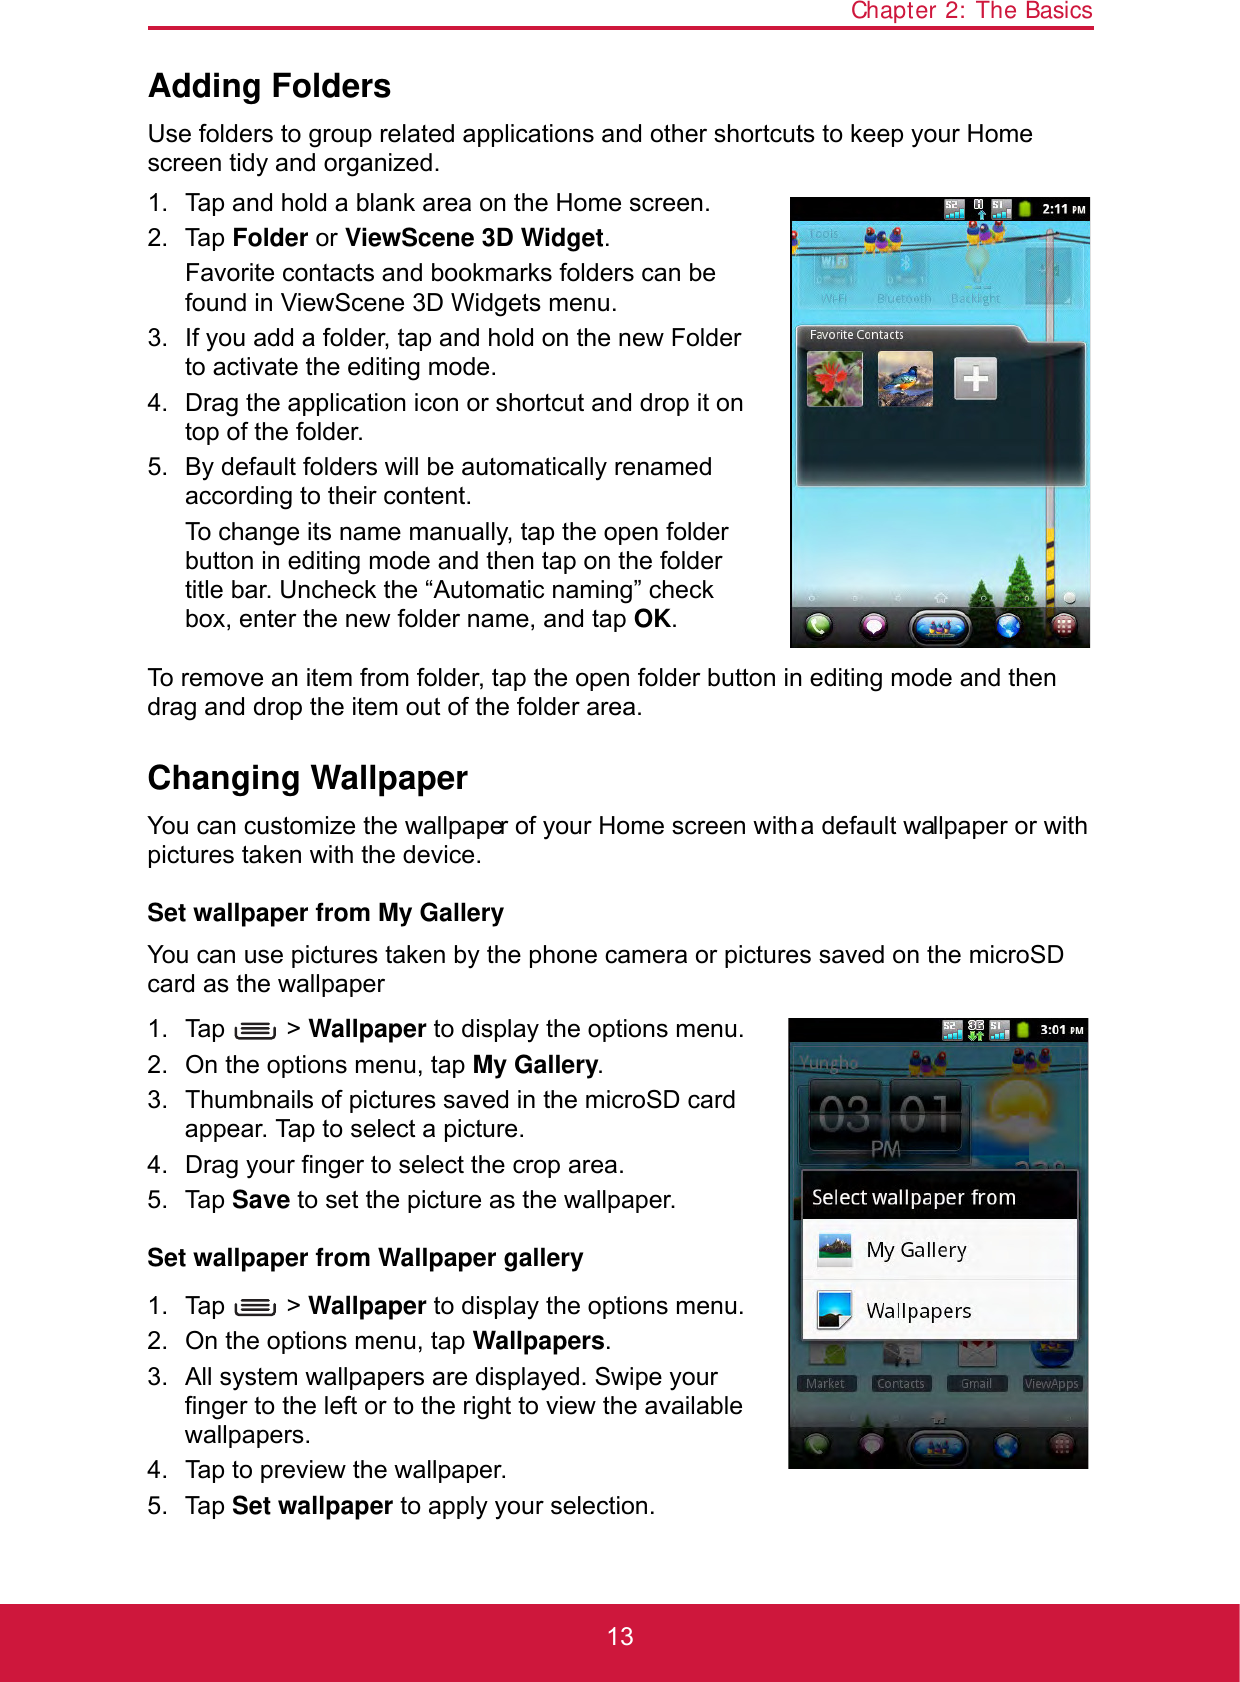 Chapter 2: The Basics13Adding FoldersUse folders to group related applications and other shortcuts to keep your Home screen tidy and organized.1. Tap and hold a blank area on the Home screen.2. Tap Folder or ViewScene 3D Widget.Favorite contacts and bookmarks folders can be found in ViewScene 3D Widgets menu.3. If you add a folder, tap and hold on the new Folder to activate the editing mode.4. Drag the application icon or shortcut and drop it on top of the folder.5. By default folders will be automatically renamed according to their content. To change its name manually, tap the open folder button in editing mode and then tap on the folder title bar. Uncheck the “Automatic naming” check box, enter the new folder name, and tap OK.To remove an item from folder, tap the open folder button in editing mode and then drag and drop the item out of the folder area.Changing WallpaperYou can customize the wallpaper of your Home screen with a default wallpaper or with pictures taken with the device.Set wallpaper from My GalleryYou can use pictures taken by the phone camera or pictures saved on the microSD card as the wallpaper1. Tap  &gt; Wallpaper to display the options menu.2. On the options menu, tap My Gallery. 3. Thumbnails of pictures saved in the microSD card appear. Tap to select a picture.4. Drag your finger to select the crop area.5. Tap Save to set the picture as the wallpaper.Set wallpaper from Wallpaper gallery1. Tap  &gt; Wallpaper to display the options menu.2. On the options menu, tap Wallpapers.3. All system wallpapers are displayed. Swipe your finger to the left or to the right to view the available wallpapers.4. Tap to preview the wallpaper.5. Tap Set wallpaper to apply your selection. 